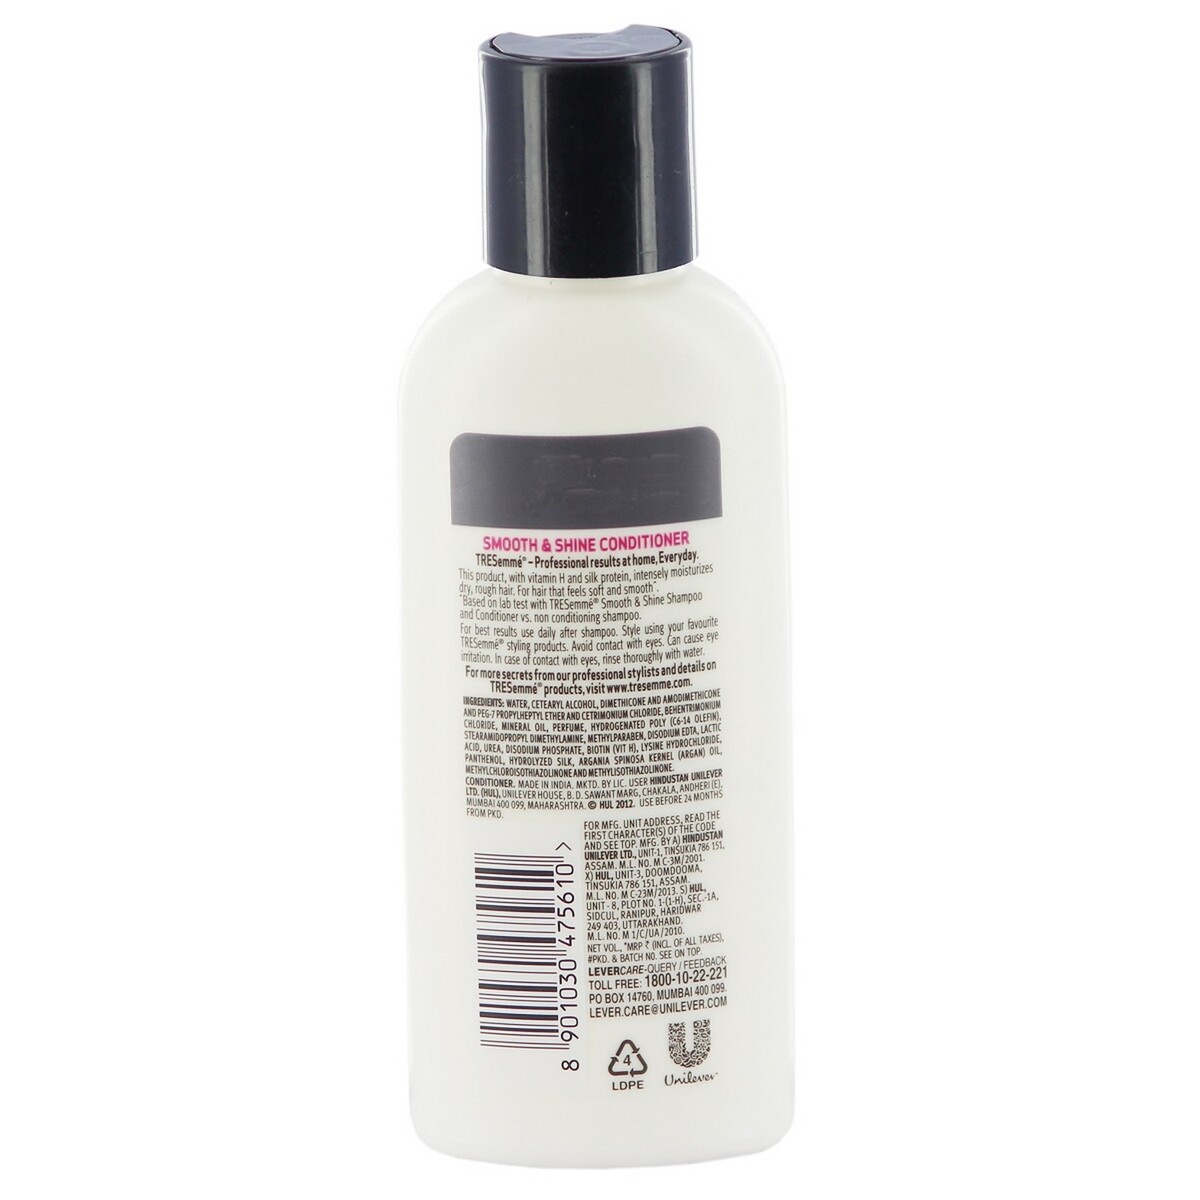 TRESemme Conditioner Smooth & Shine 190ml